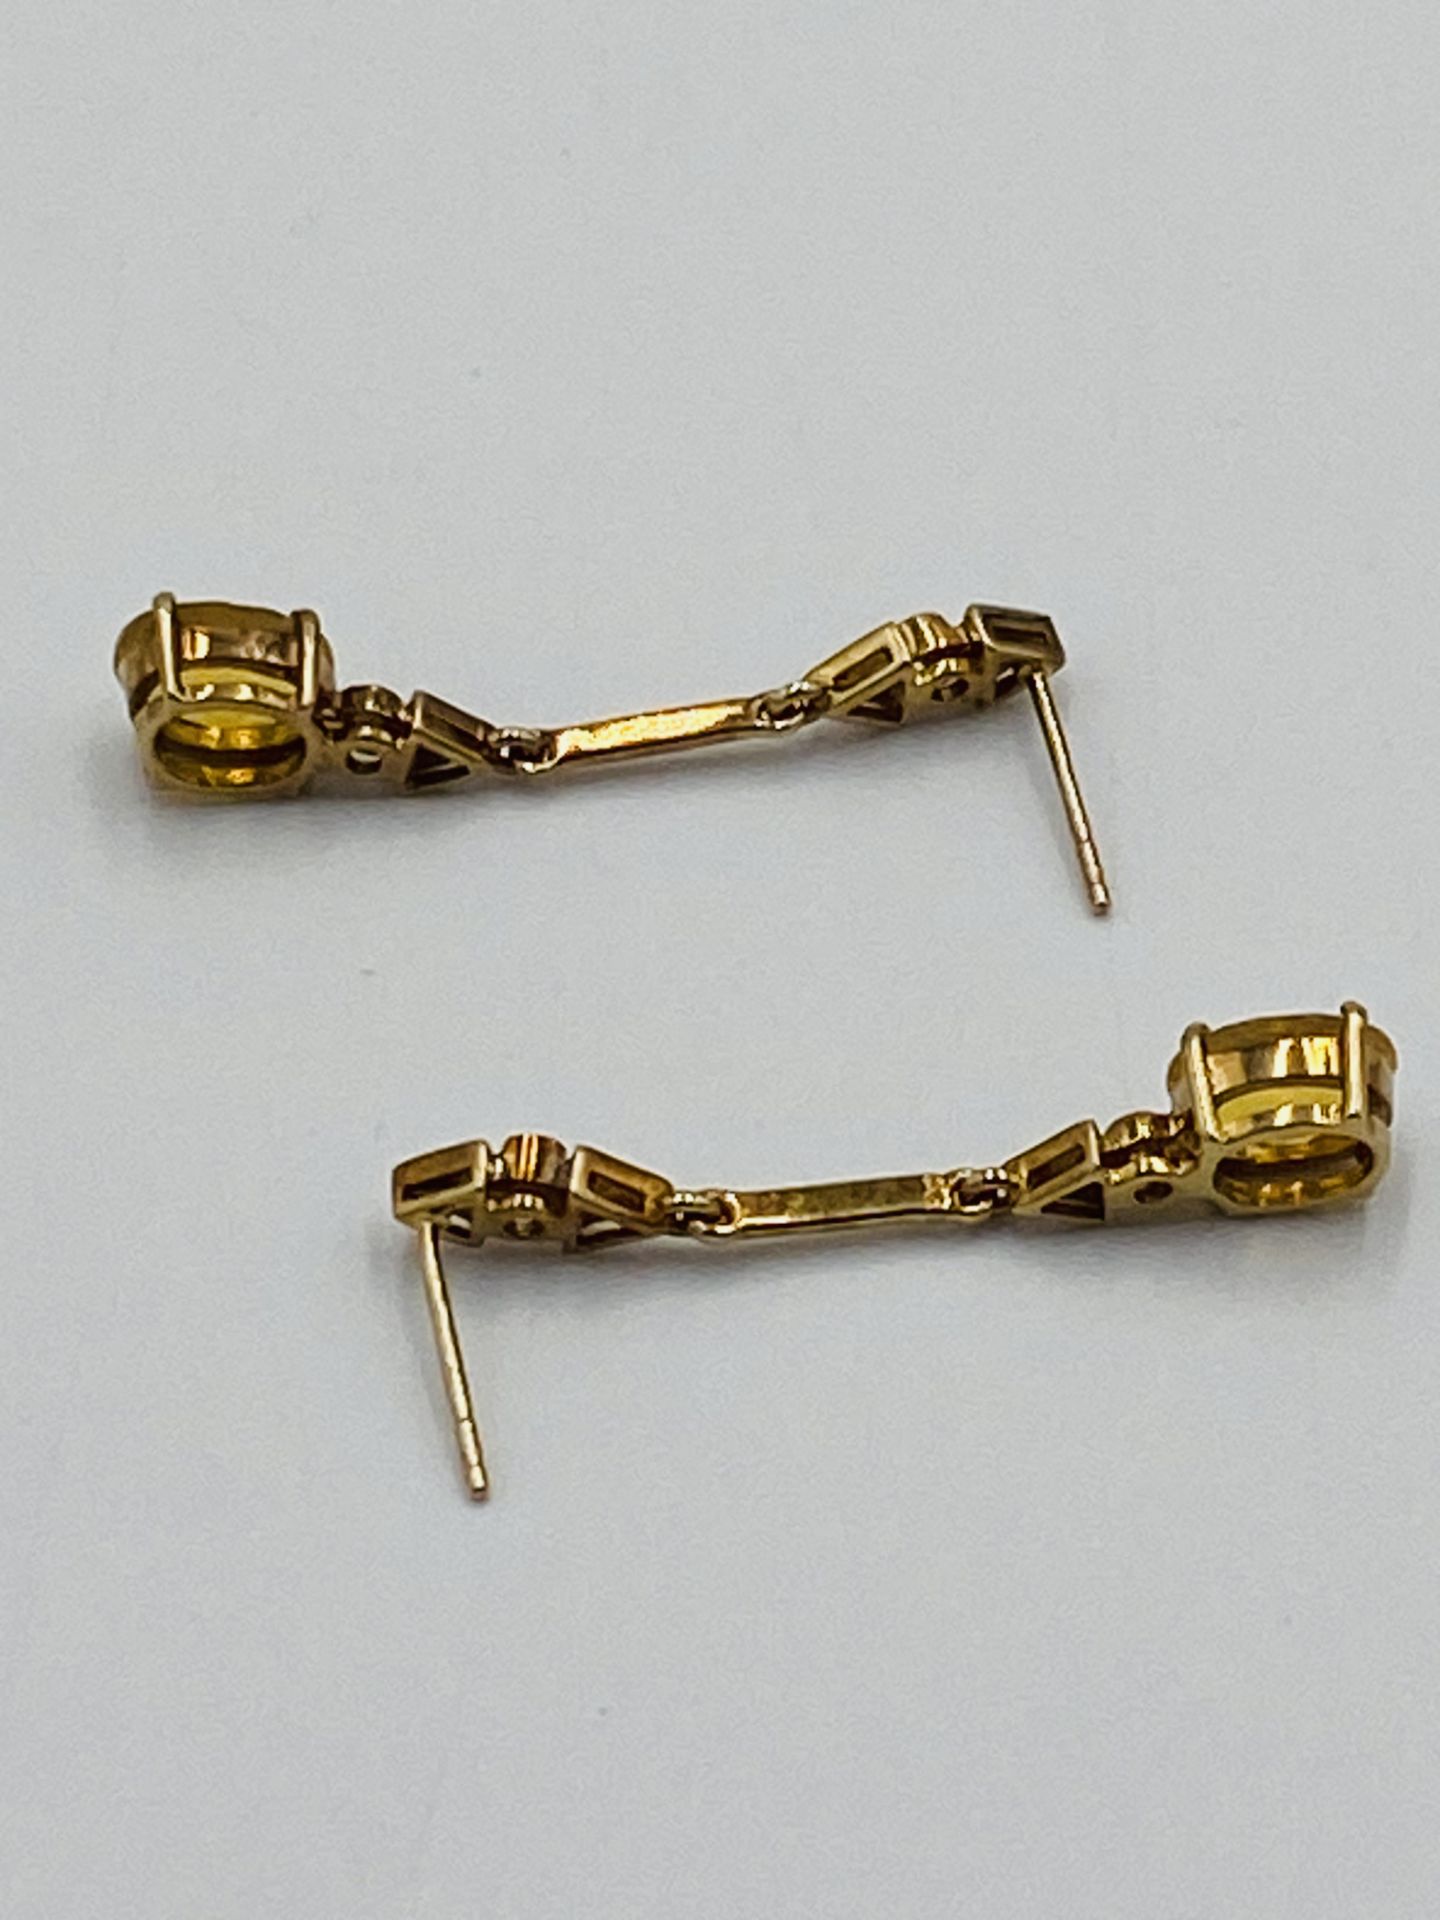 Pair of 9ct gold earrings - Image 4 of 6